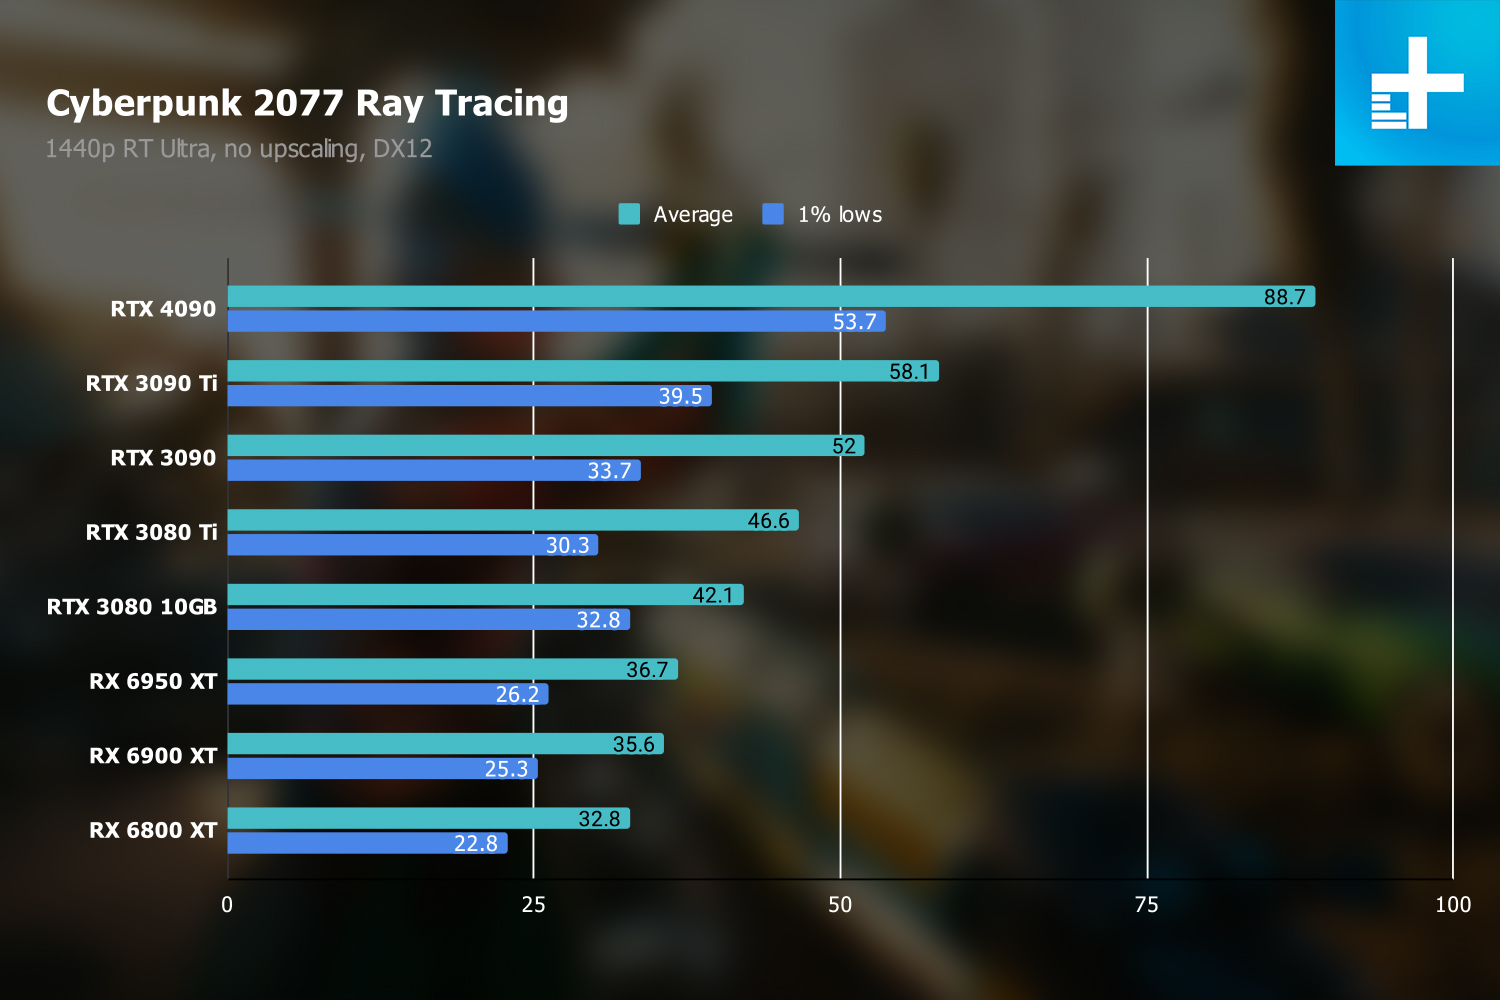 A chart showing the performance of the RTX 4090 with ray tracing turned on, in 1440p, in Cyberpunk 2077.